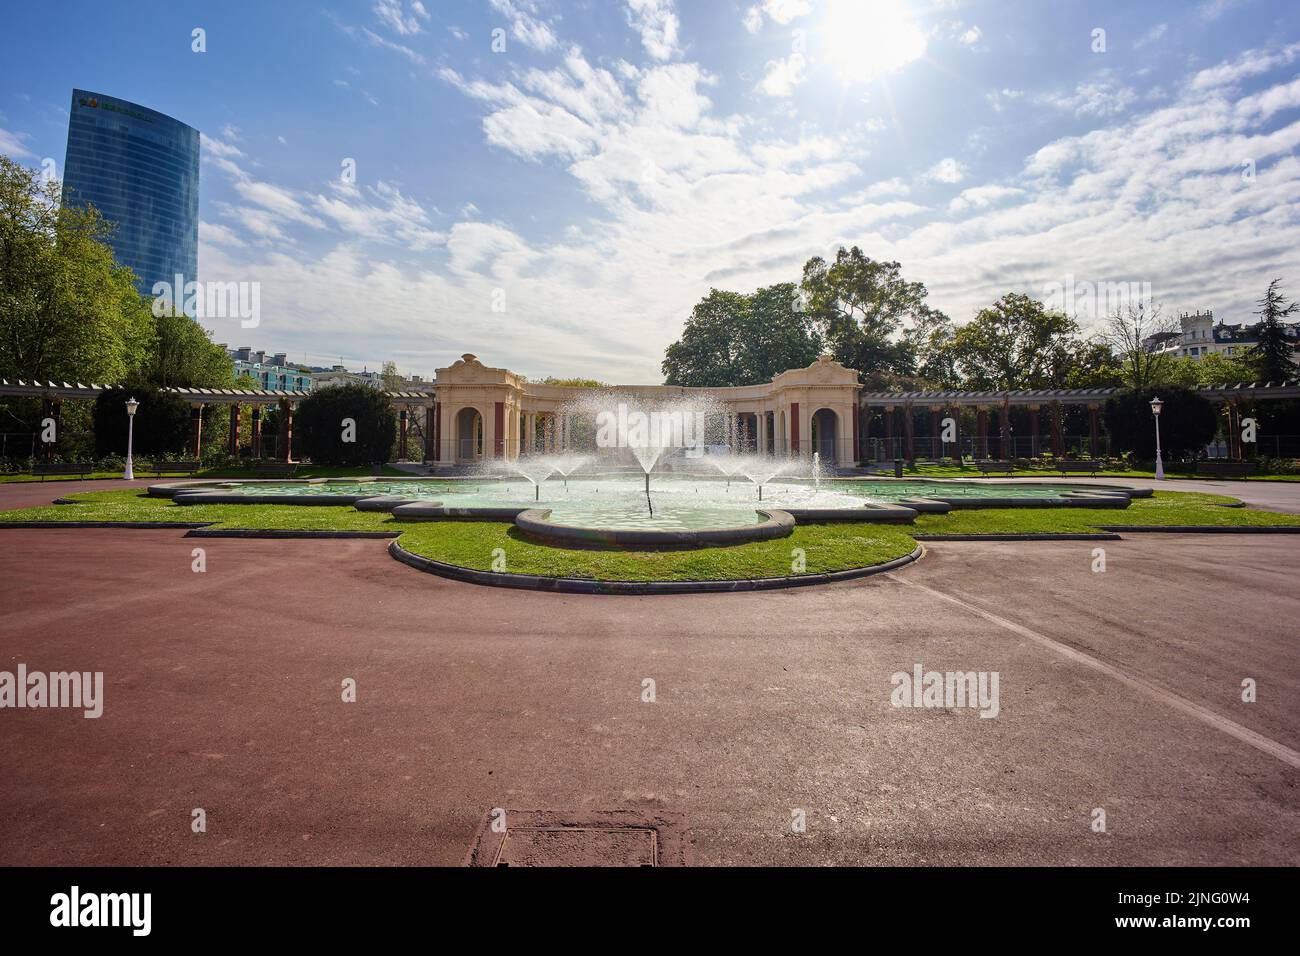 The beautiful Dona Casilda Iturrizar park in Bilbao, Spain, with fountains on a sunny day Stock Photo